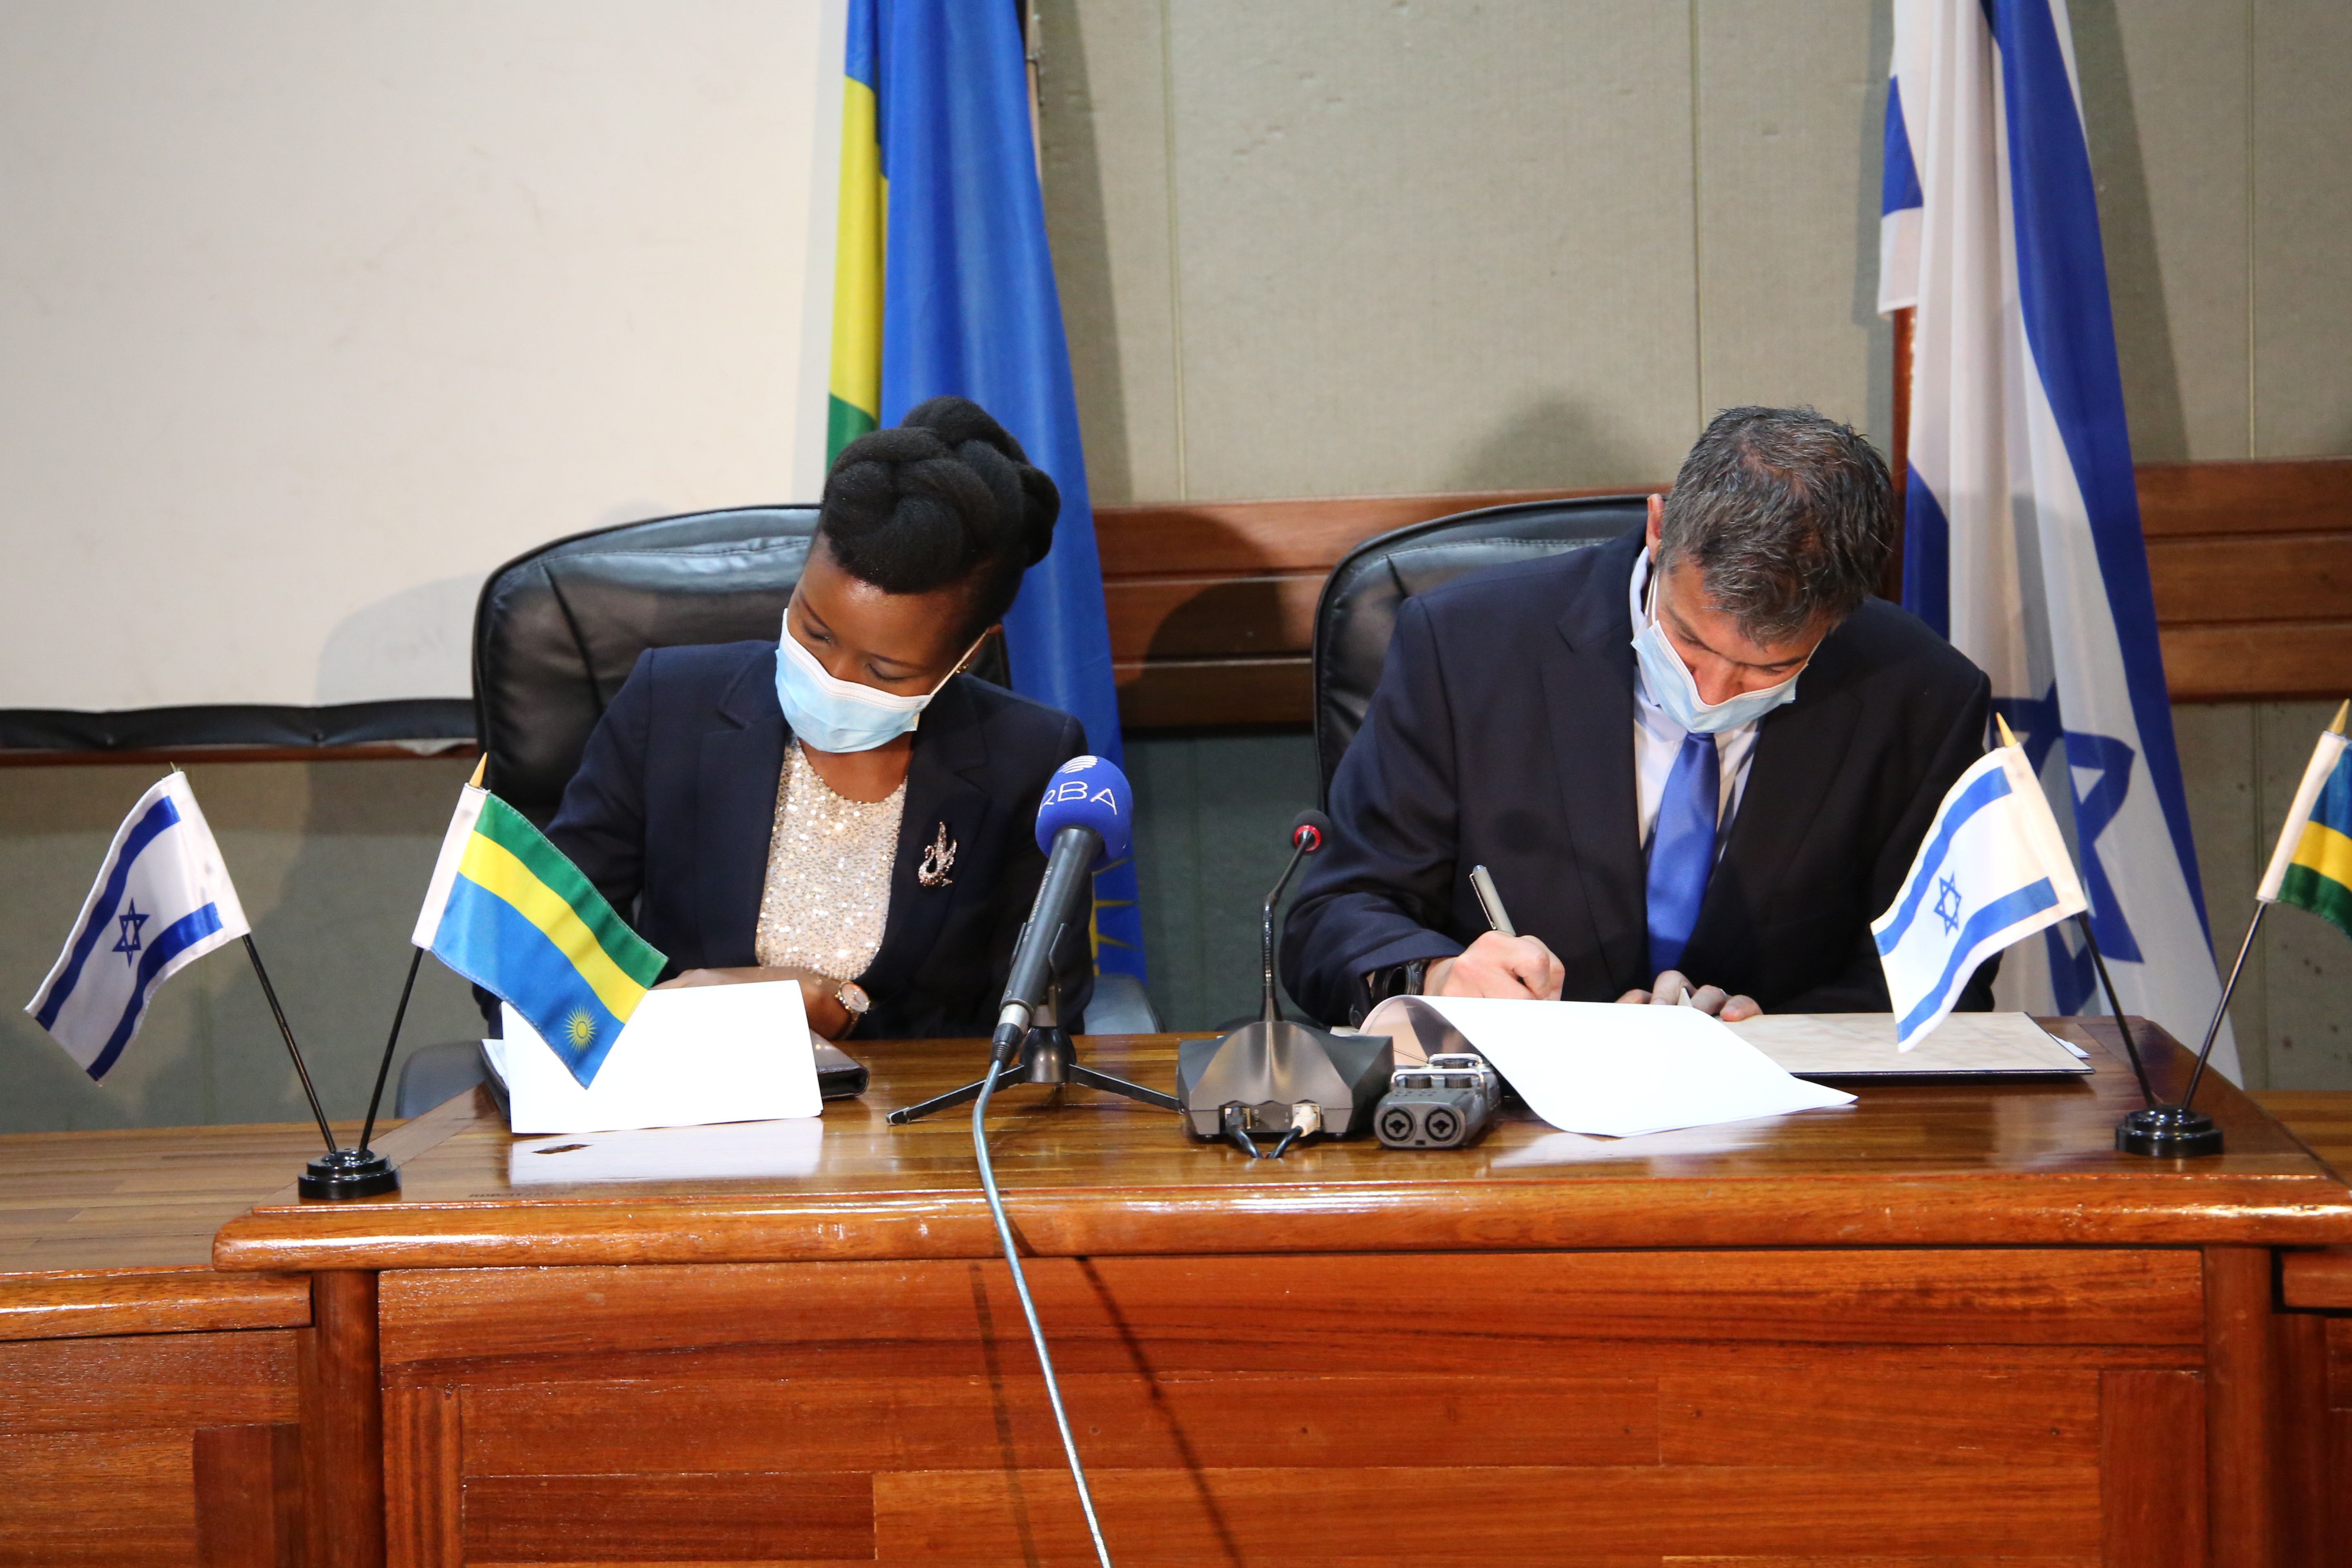 Minister of ICT and Innovation in Rwanda,Paula Ingabire and State Minister of Communication of Israel, Yoaz Hendel during the Signing  MoU of  promoting ICT Sector, in Kigali on Friday. / Craish Bahizi